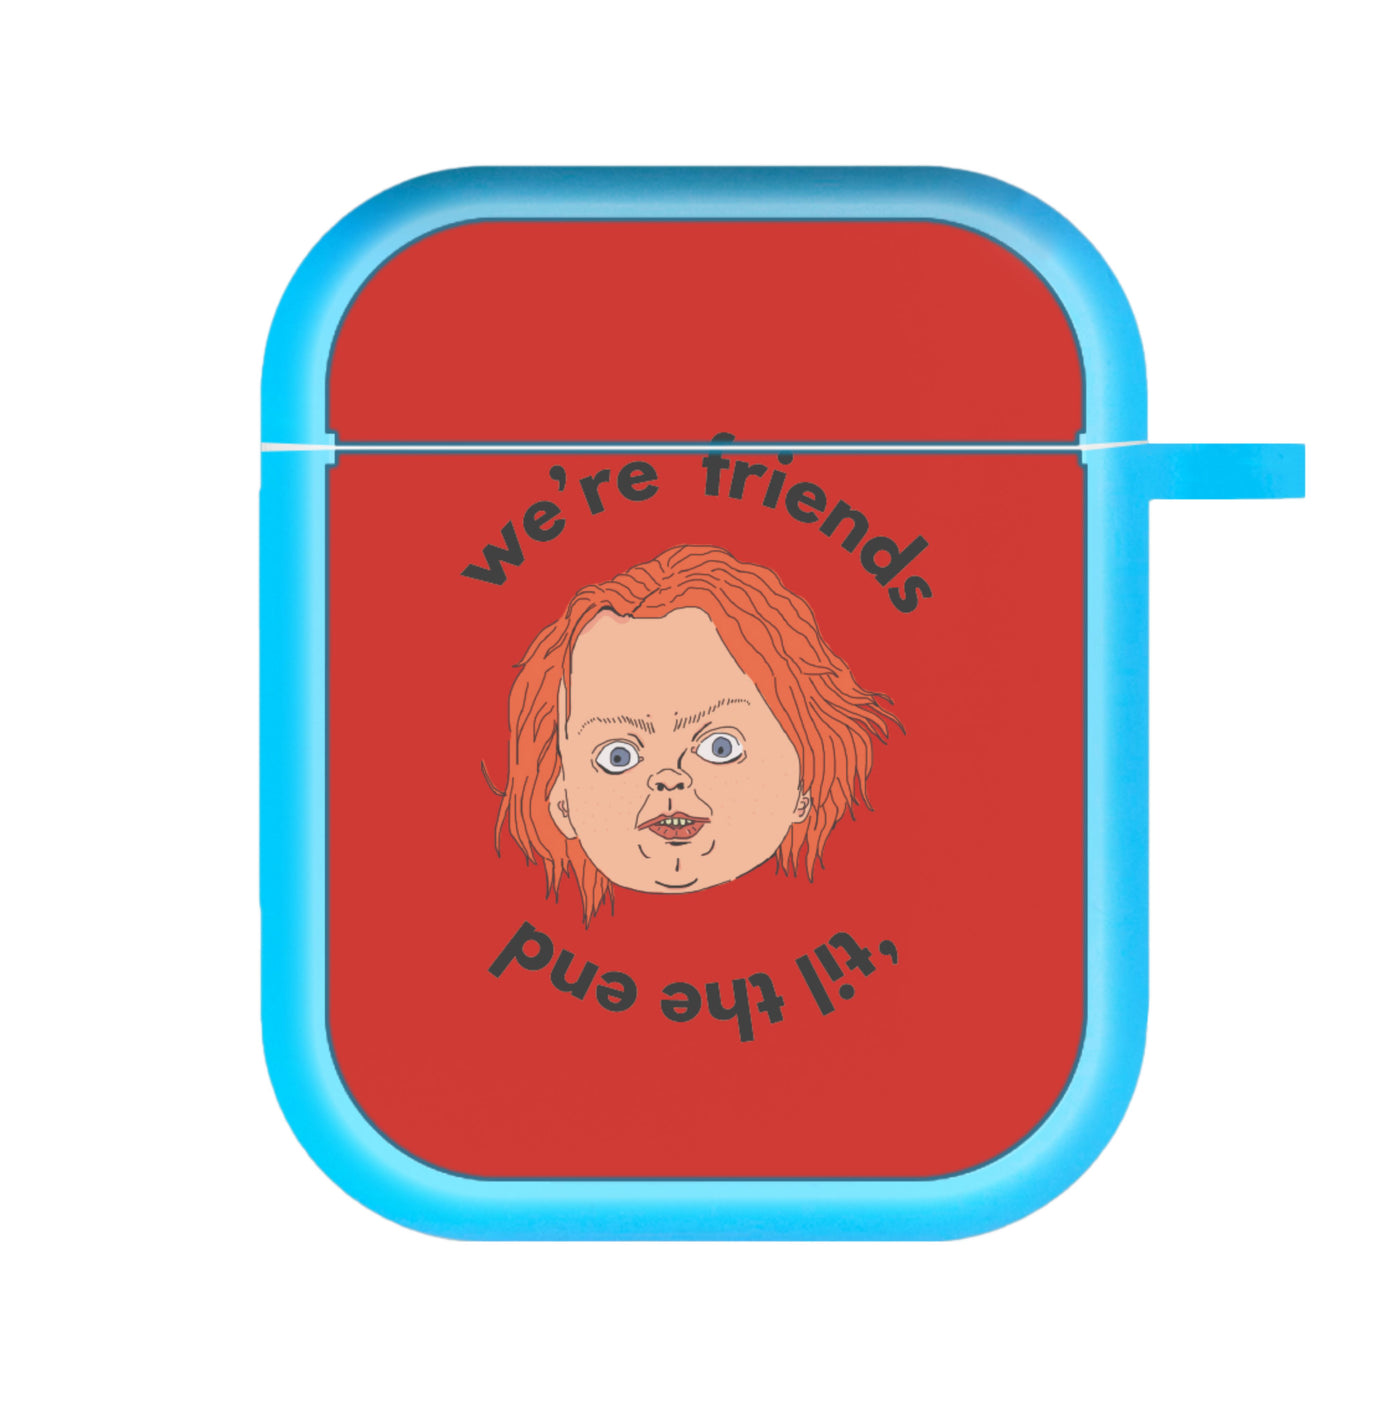 We're Friends 'til the end - Chucky AirPods Case